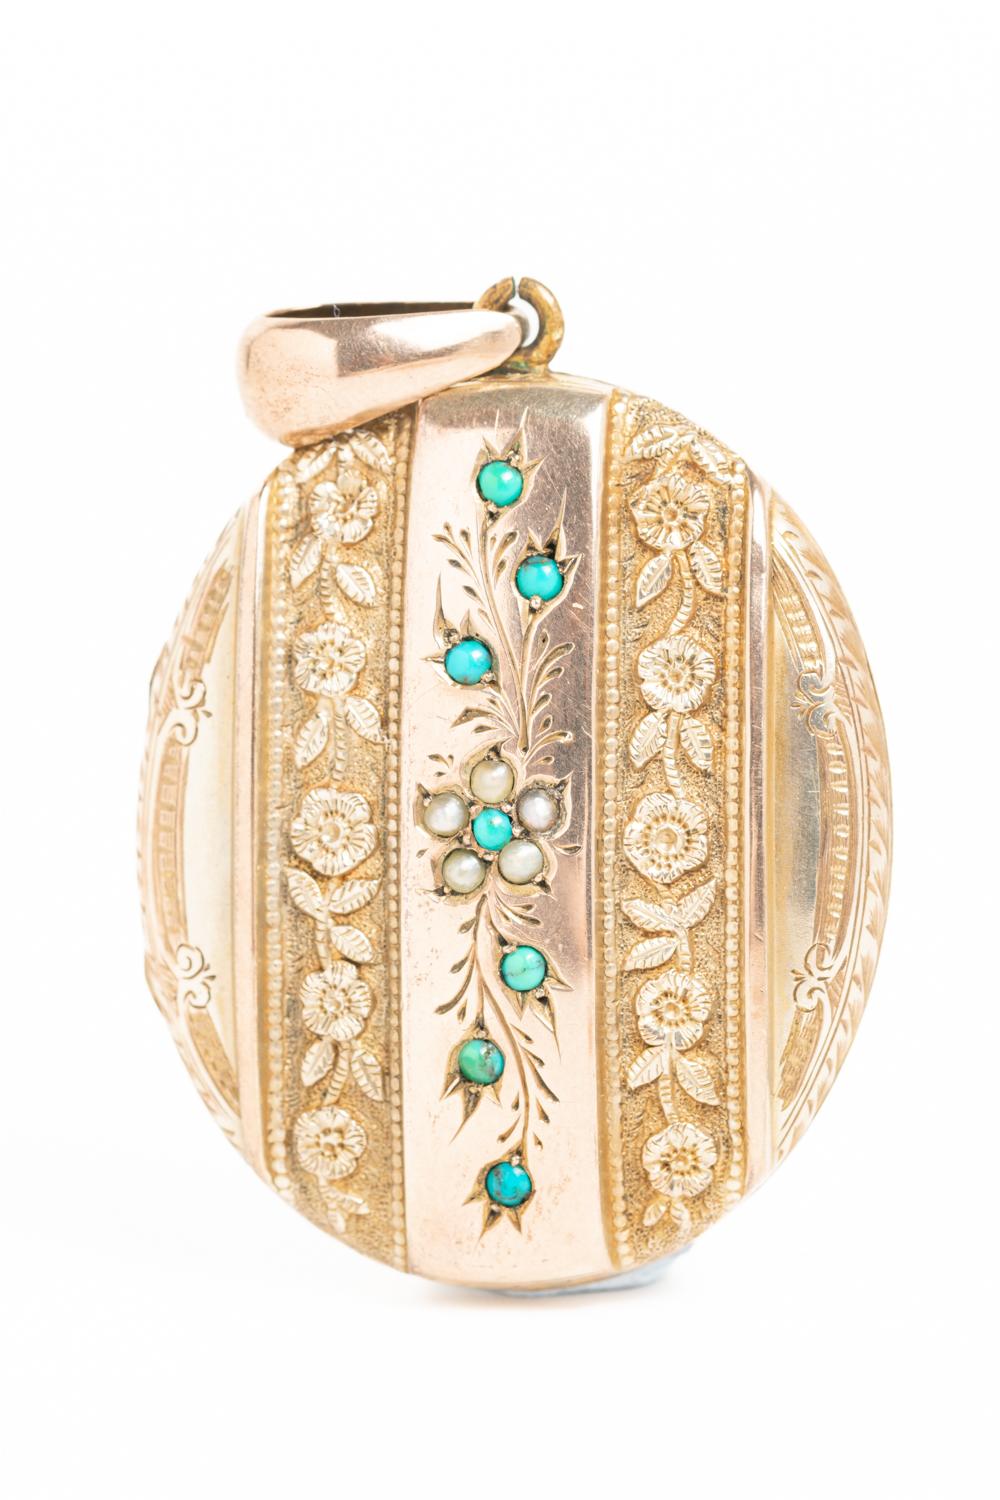 Cabochon Victorian Silver Gilt And 9ct Gold Floral Locket with Turquoise and Pearl